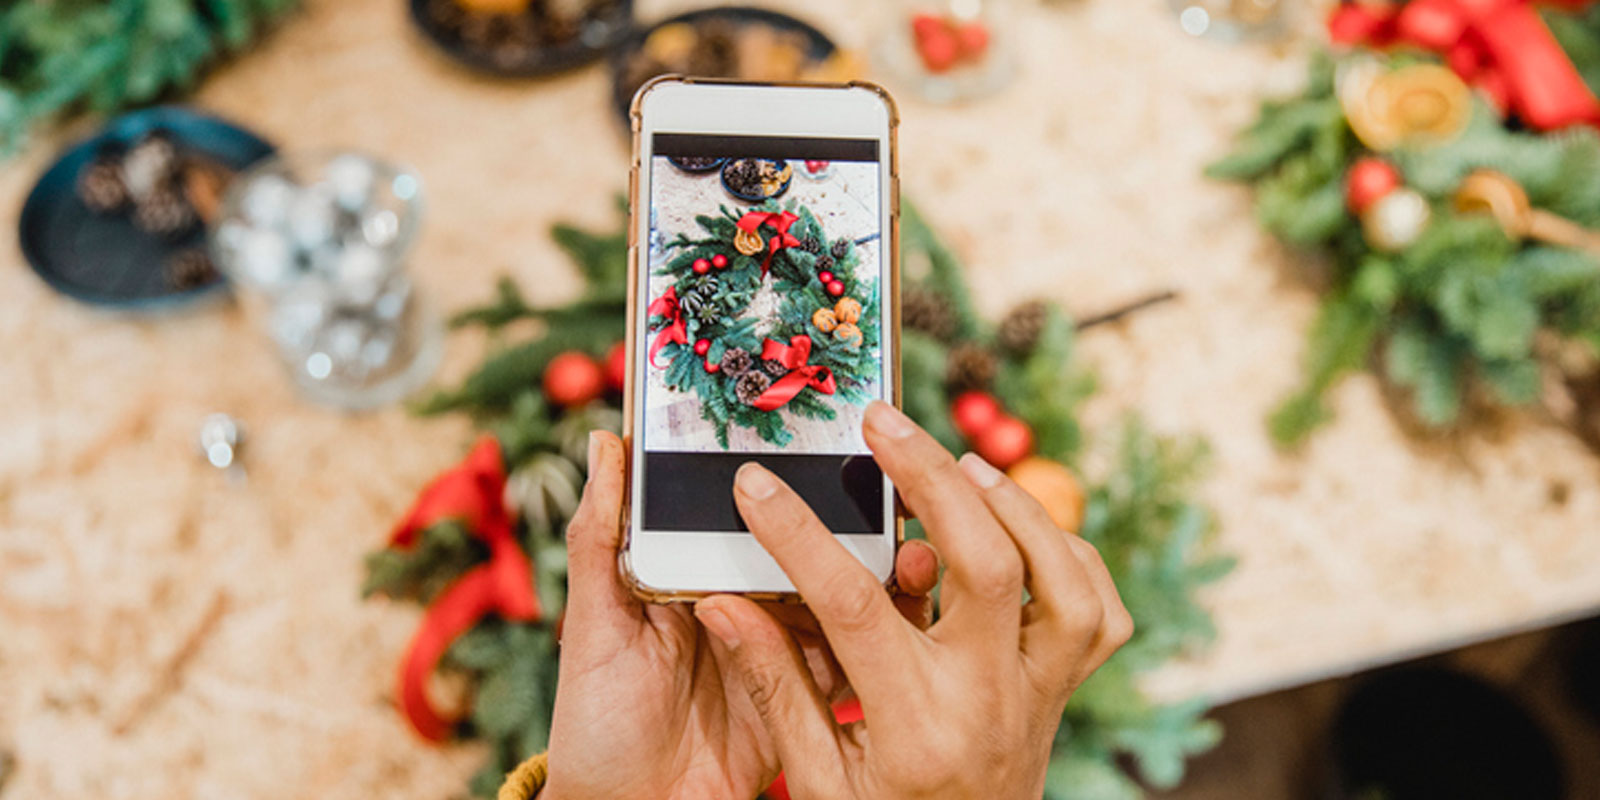 Person holding a phone taking a picture of a Christmas wreath.